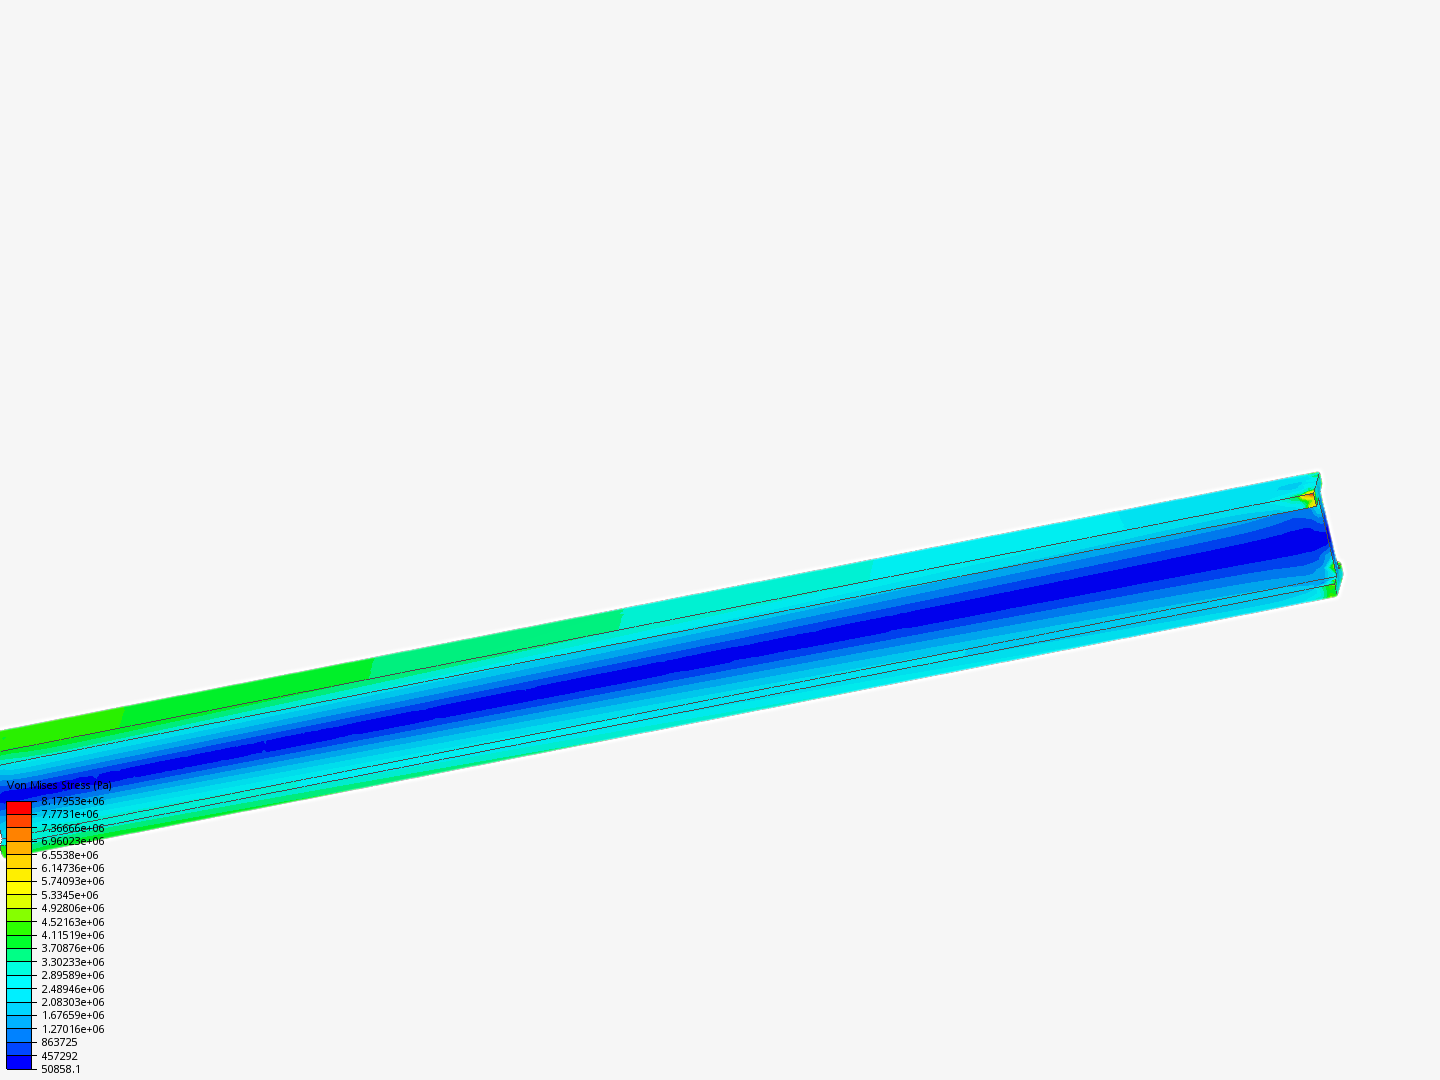 SimScale for Engineering Simulations - FEA for Beginners - Static Analysis of an I Beam - Project 1 - Copy image